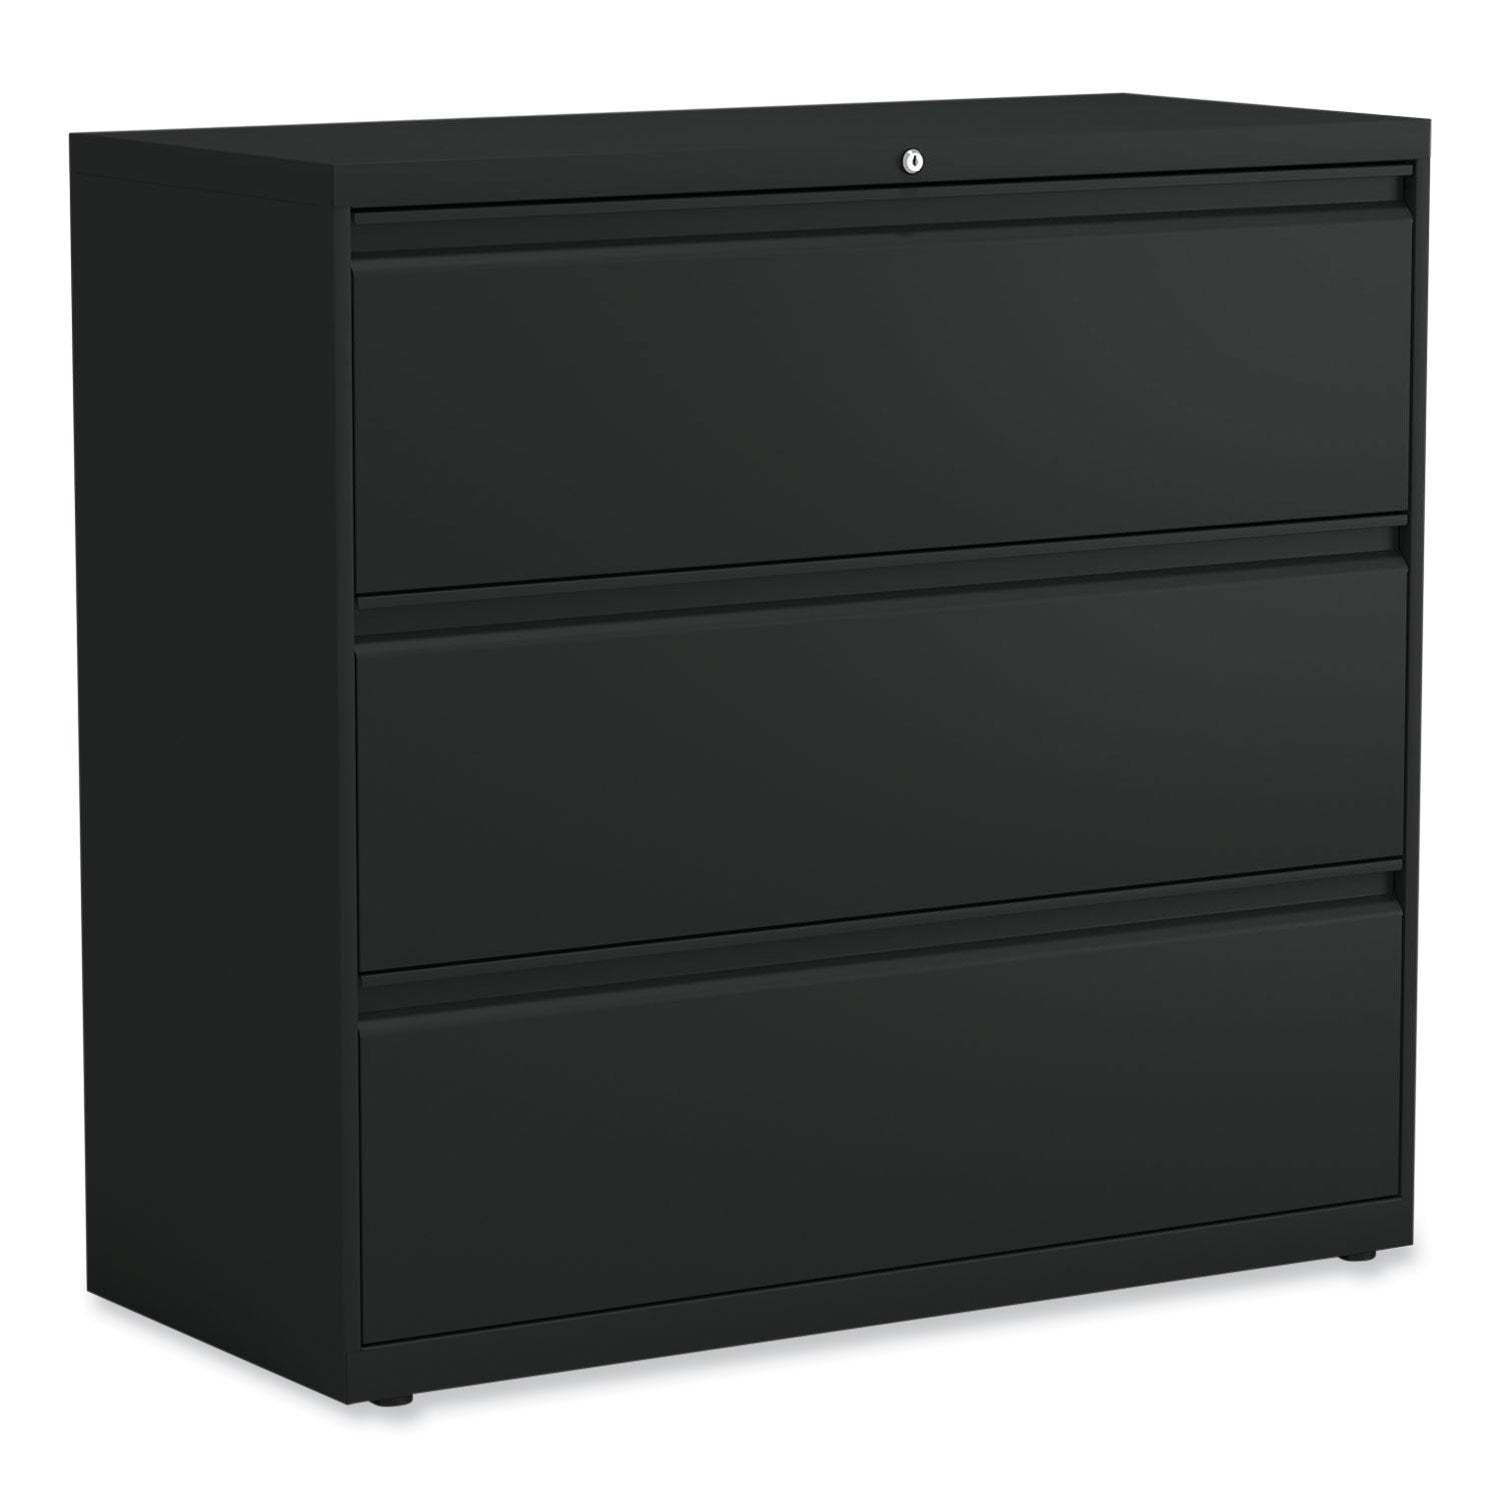 lateral-file-3-legal-letter-a4-a5-size-file-drawers-black-42-x-1863-x-4025_alehlf4241bl - 1